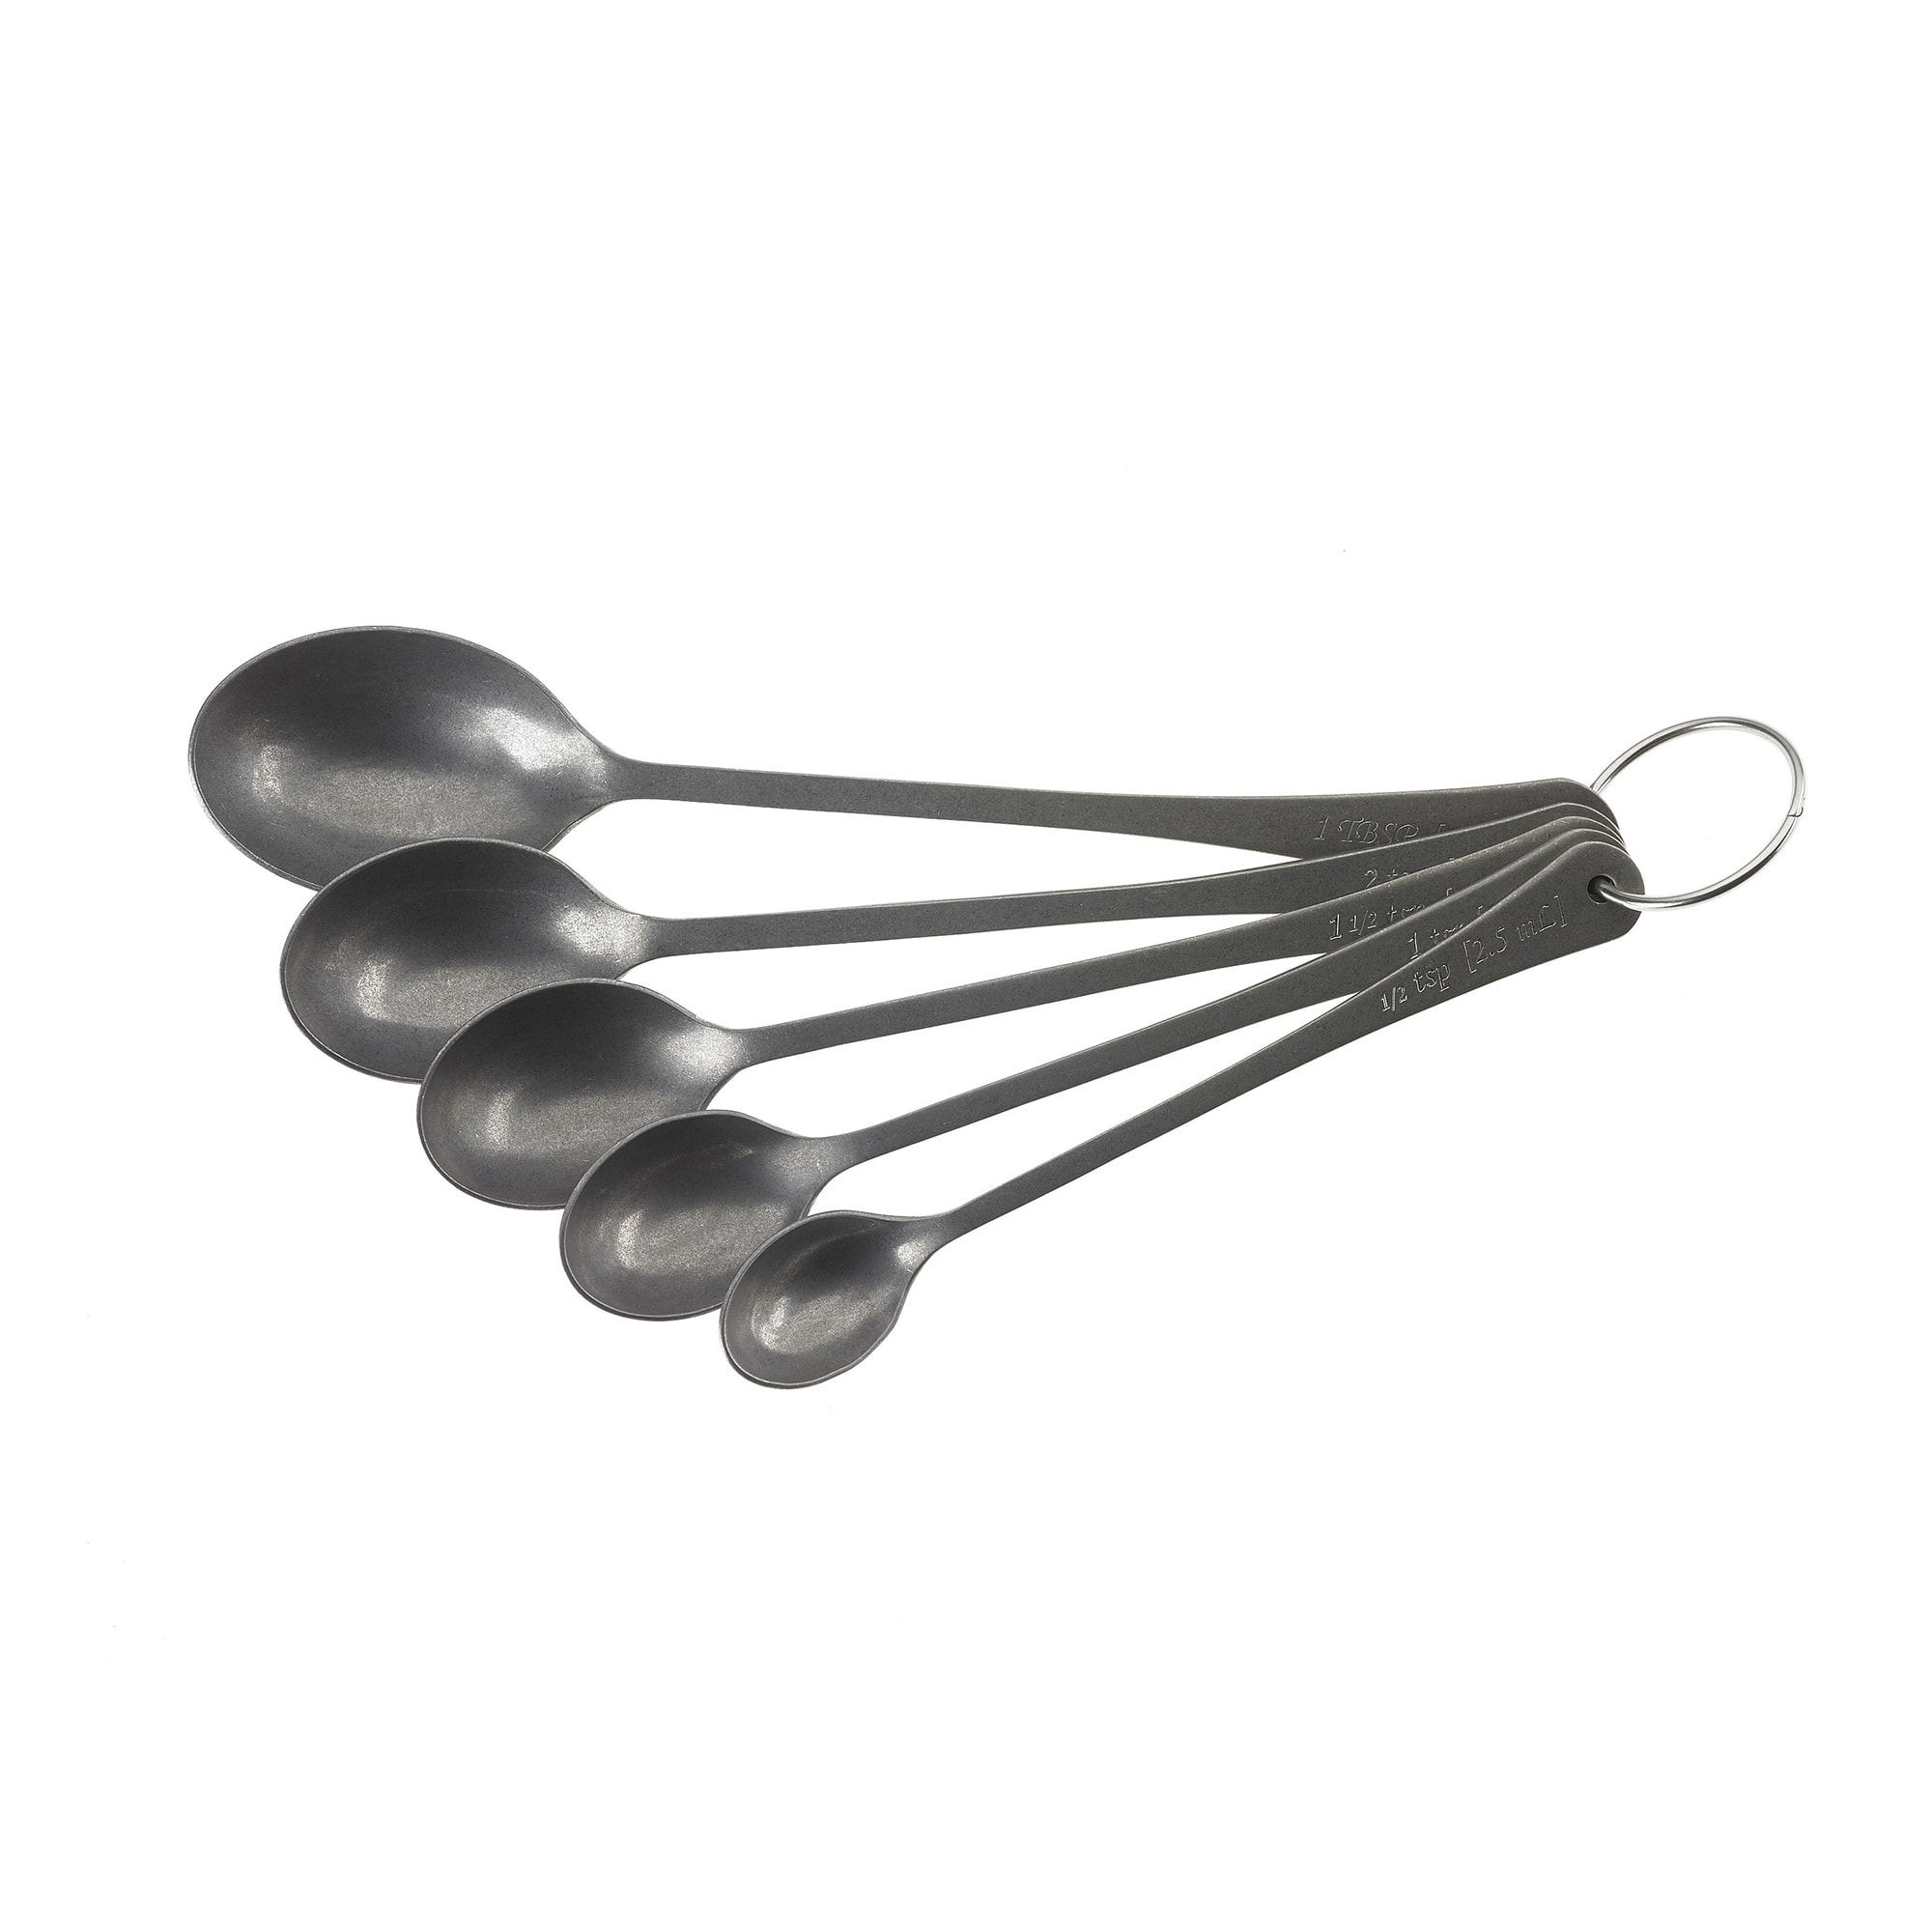 American Metalcraft SBW10 10 1/2 Stainless Steel Mini Bar Whisk